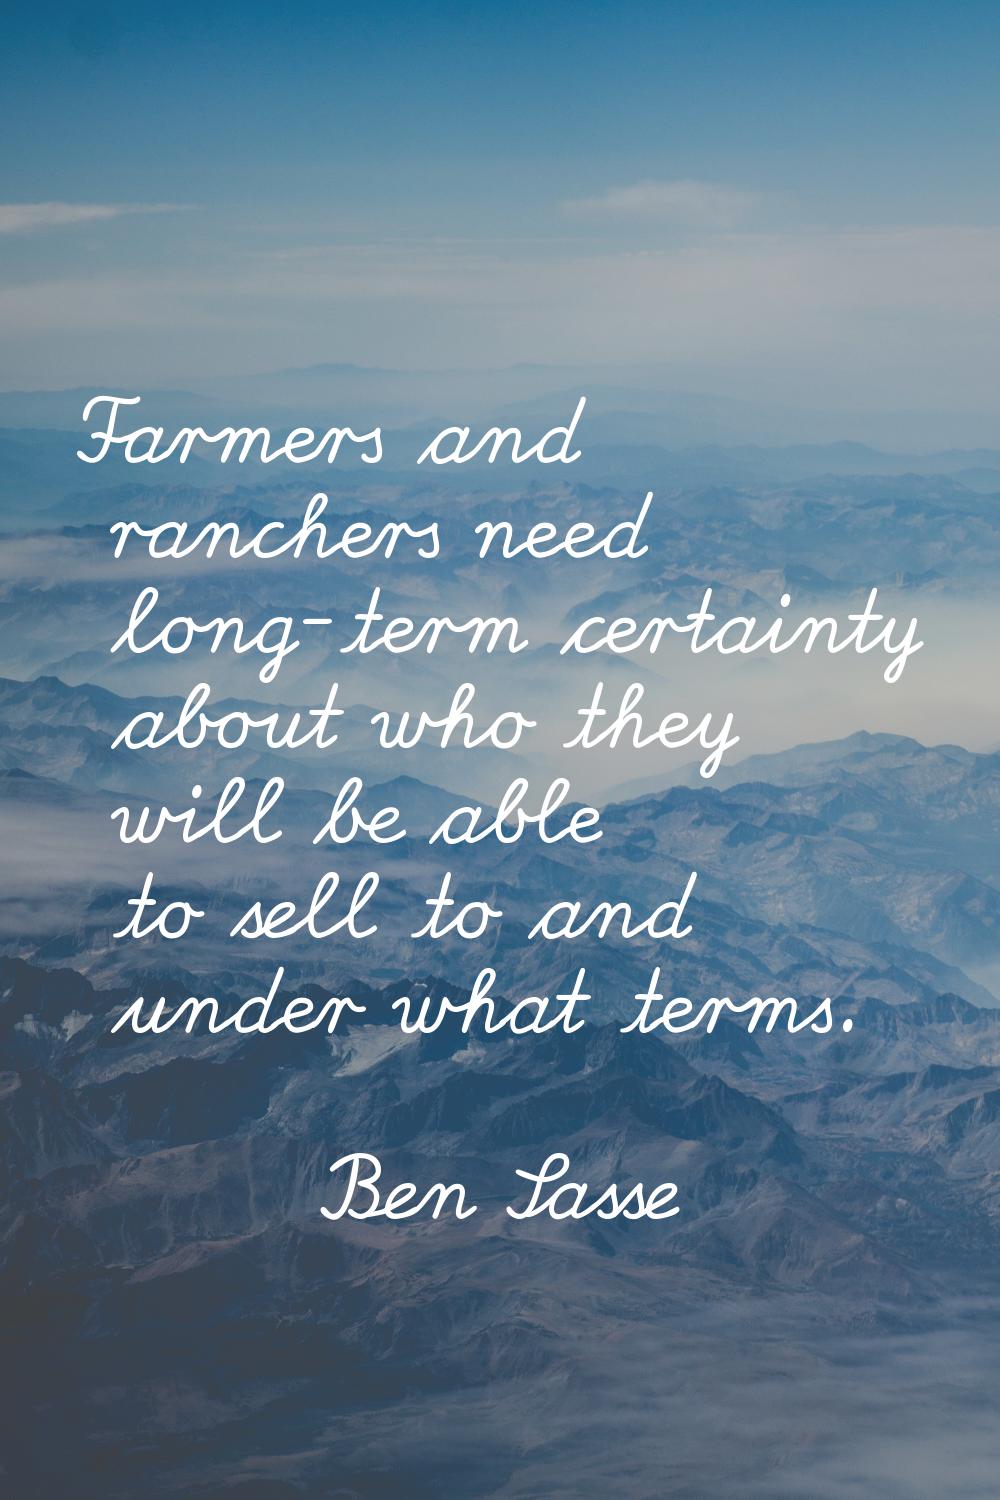 Farmers and ranchers need long-term certainty about who they will be able to sell to and under what